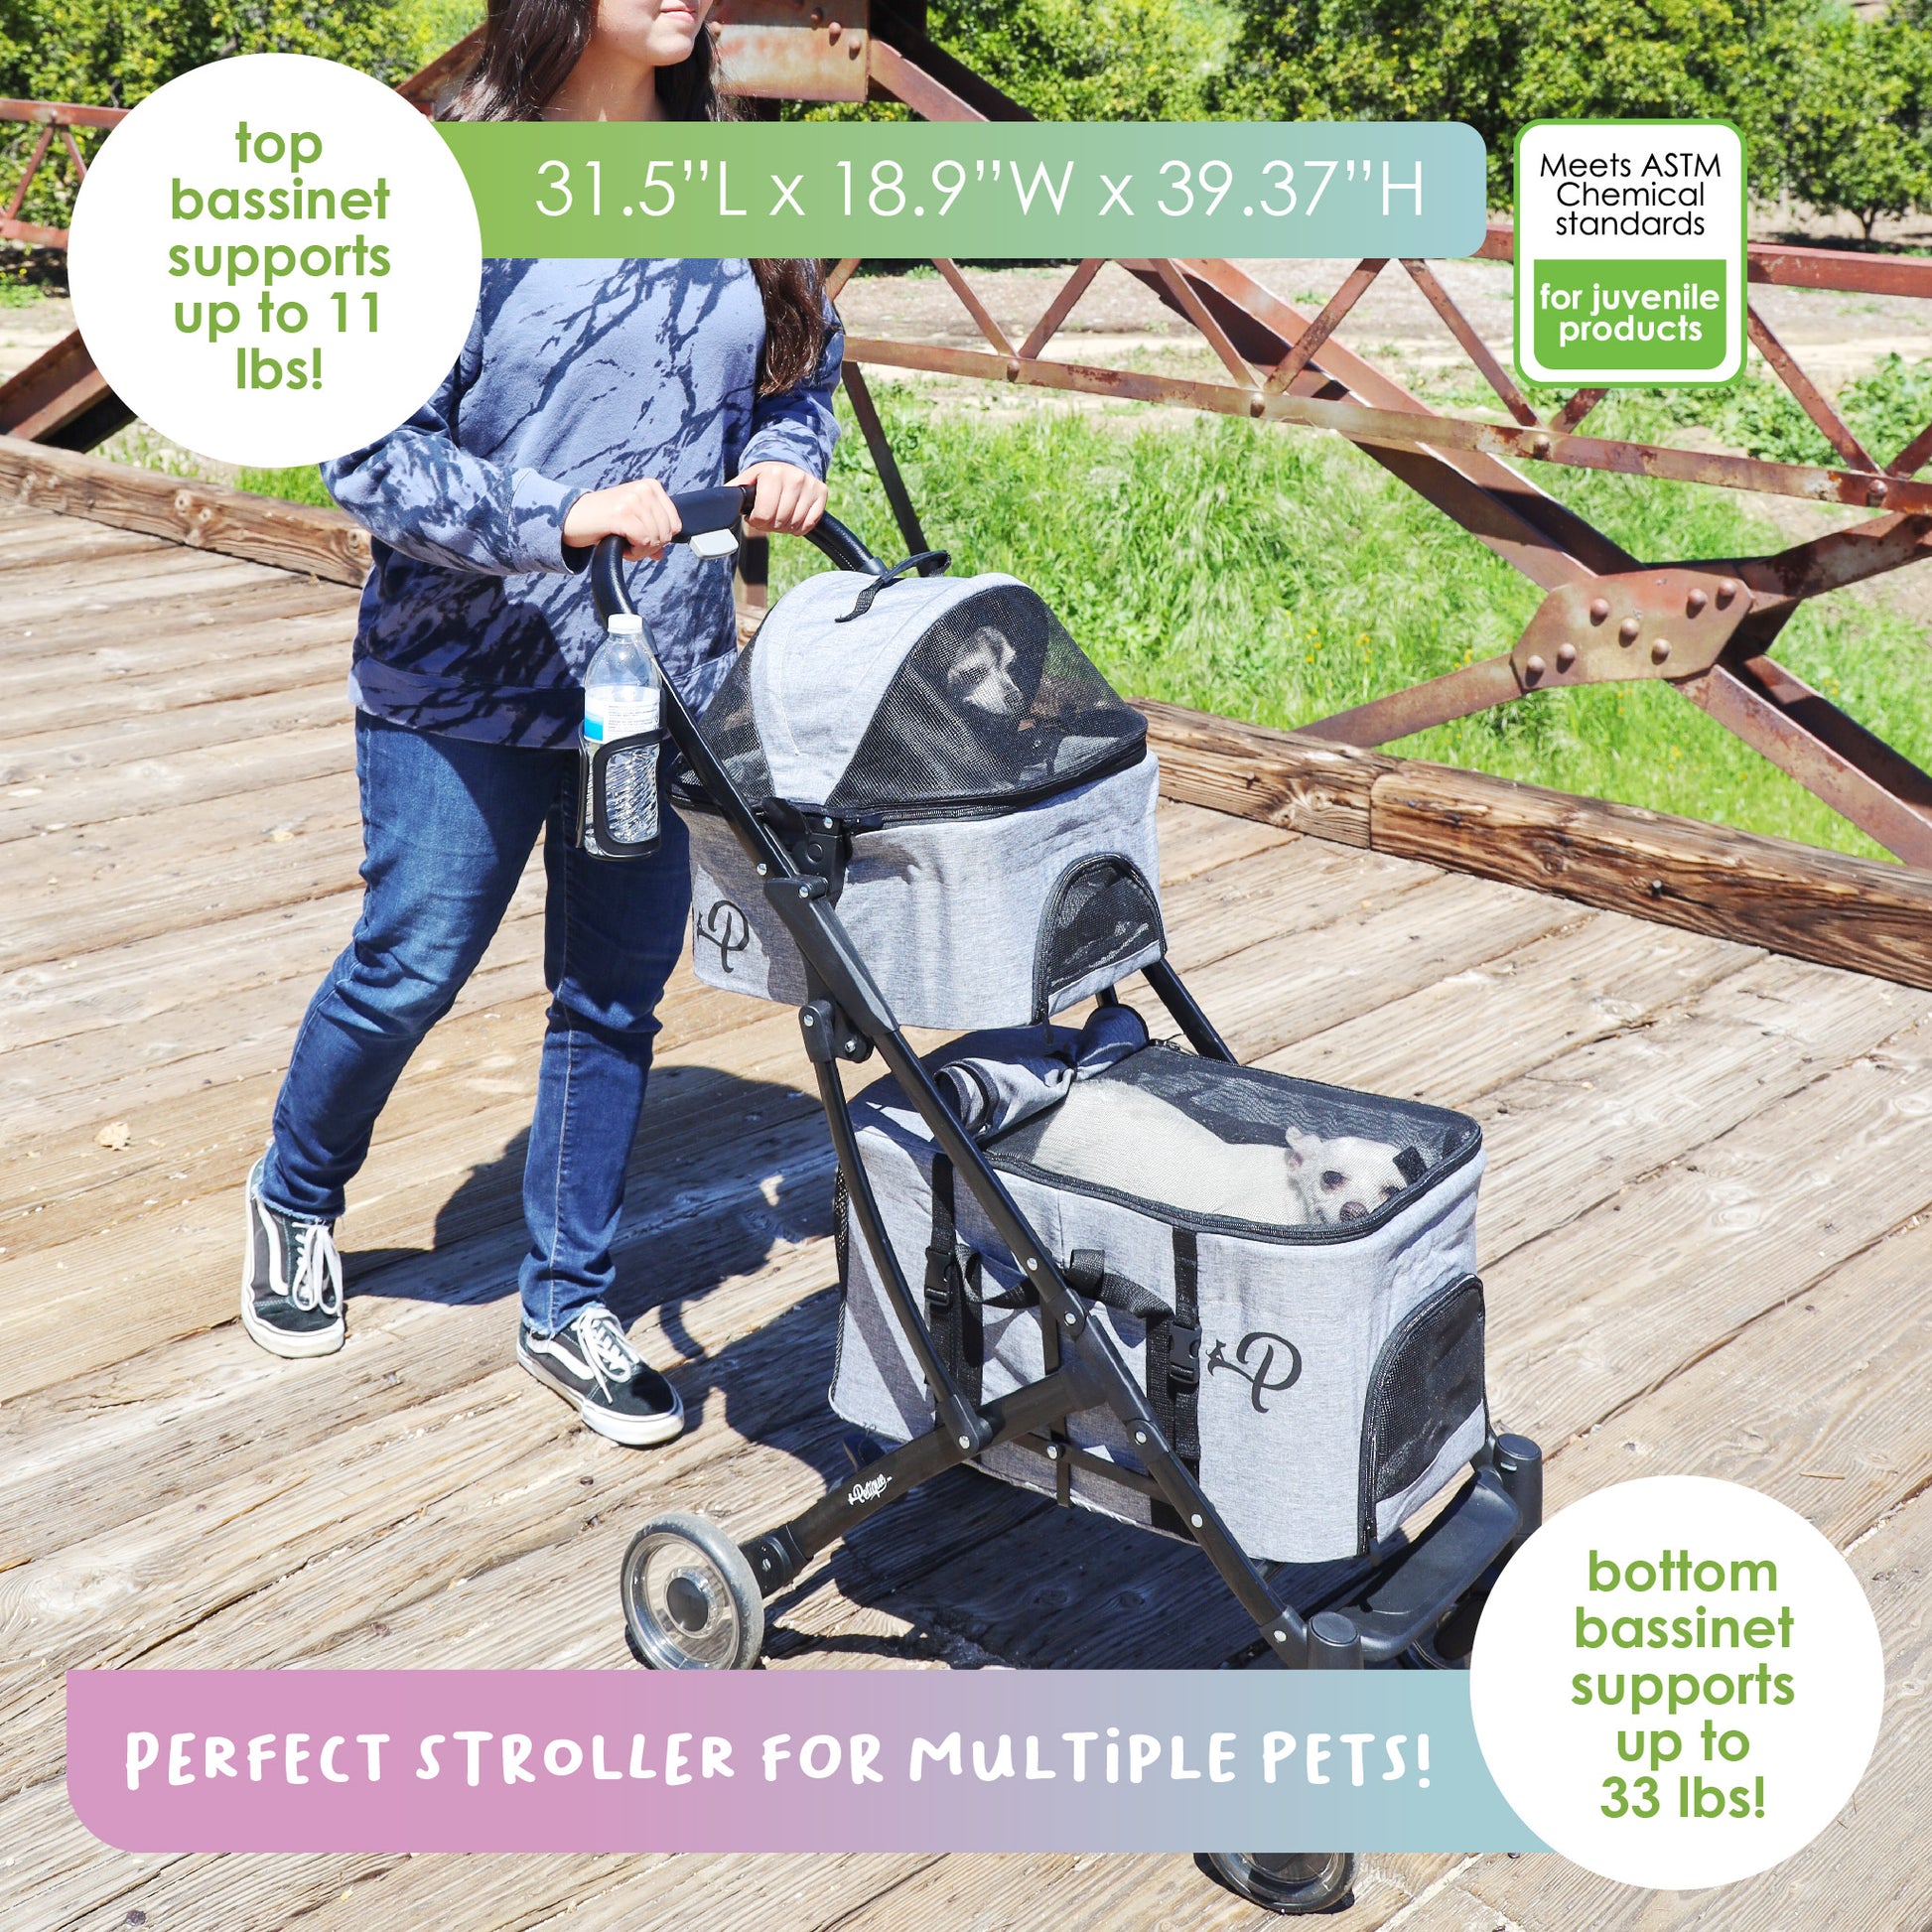 pet stroller supports up to 11 LBs and 22 LBs